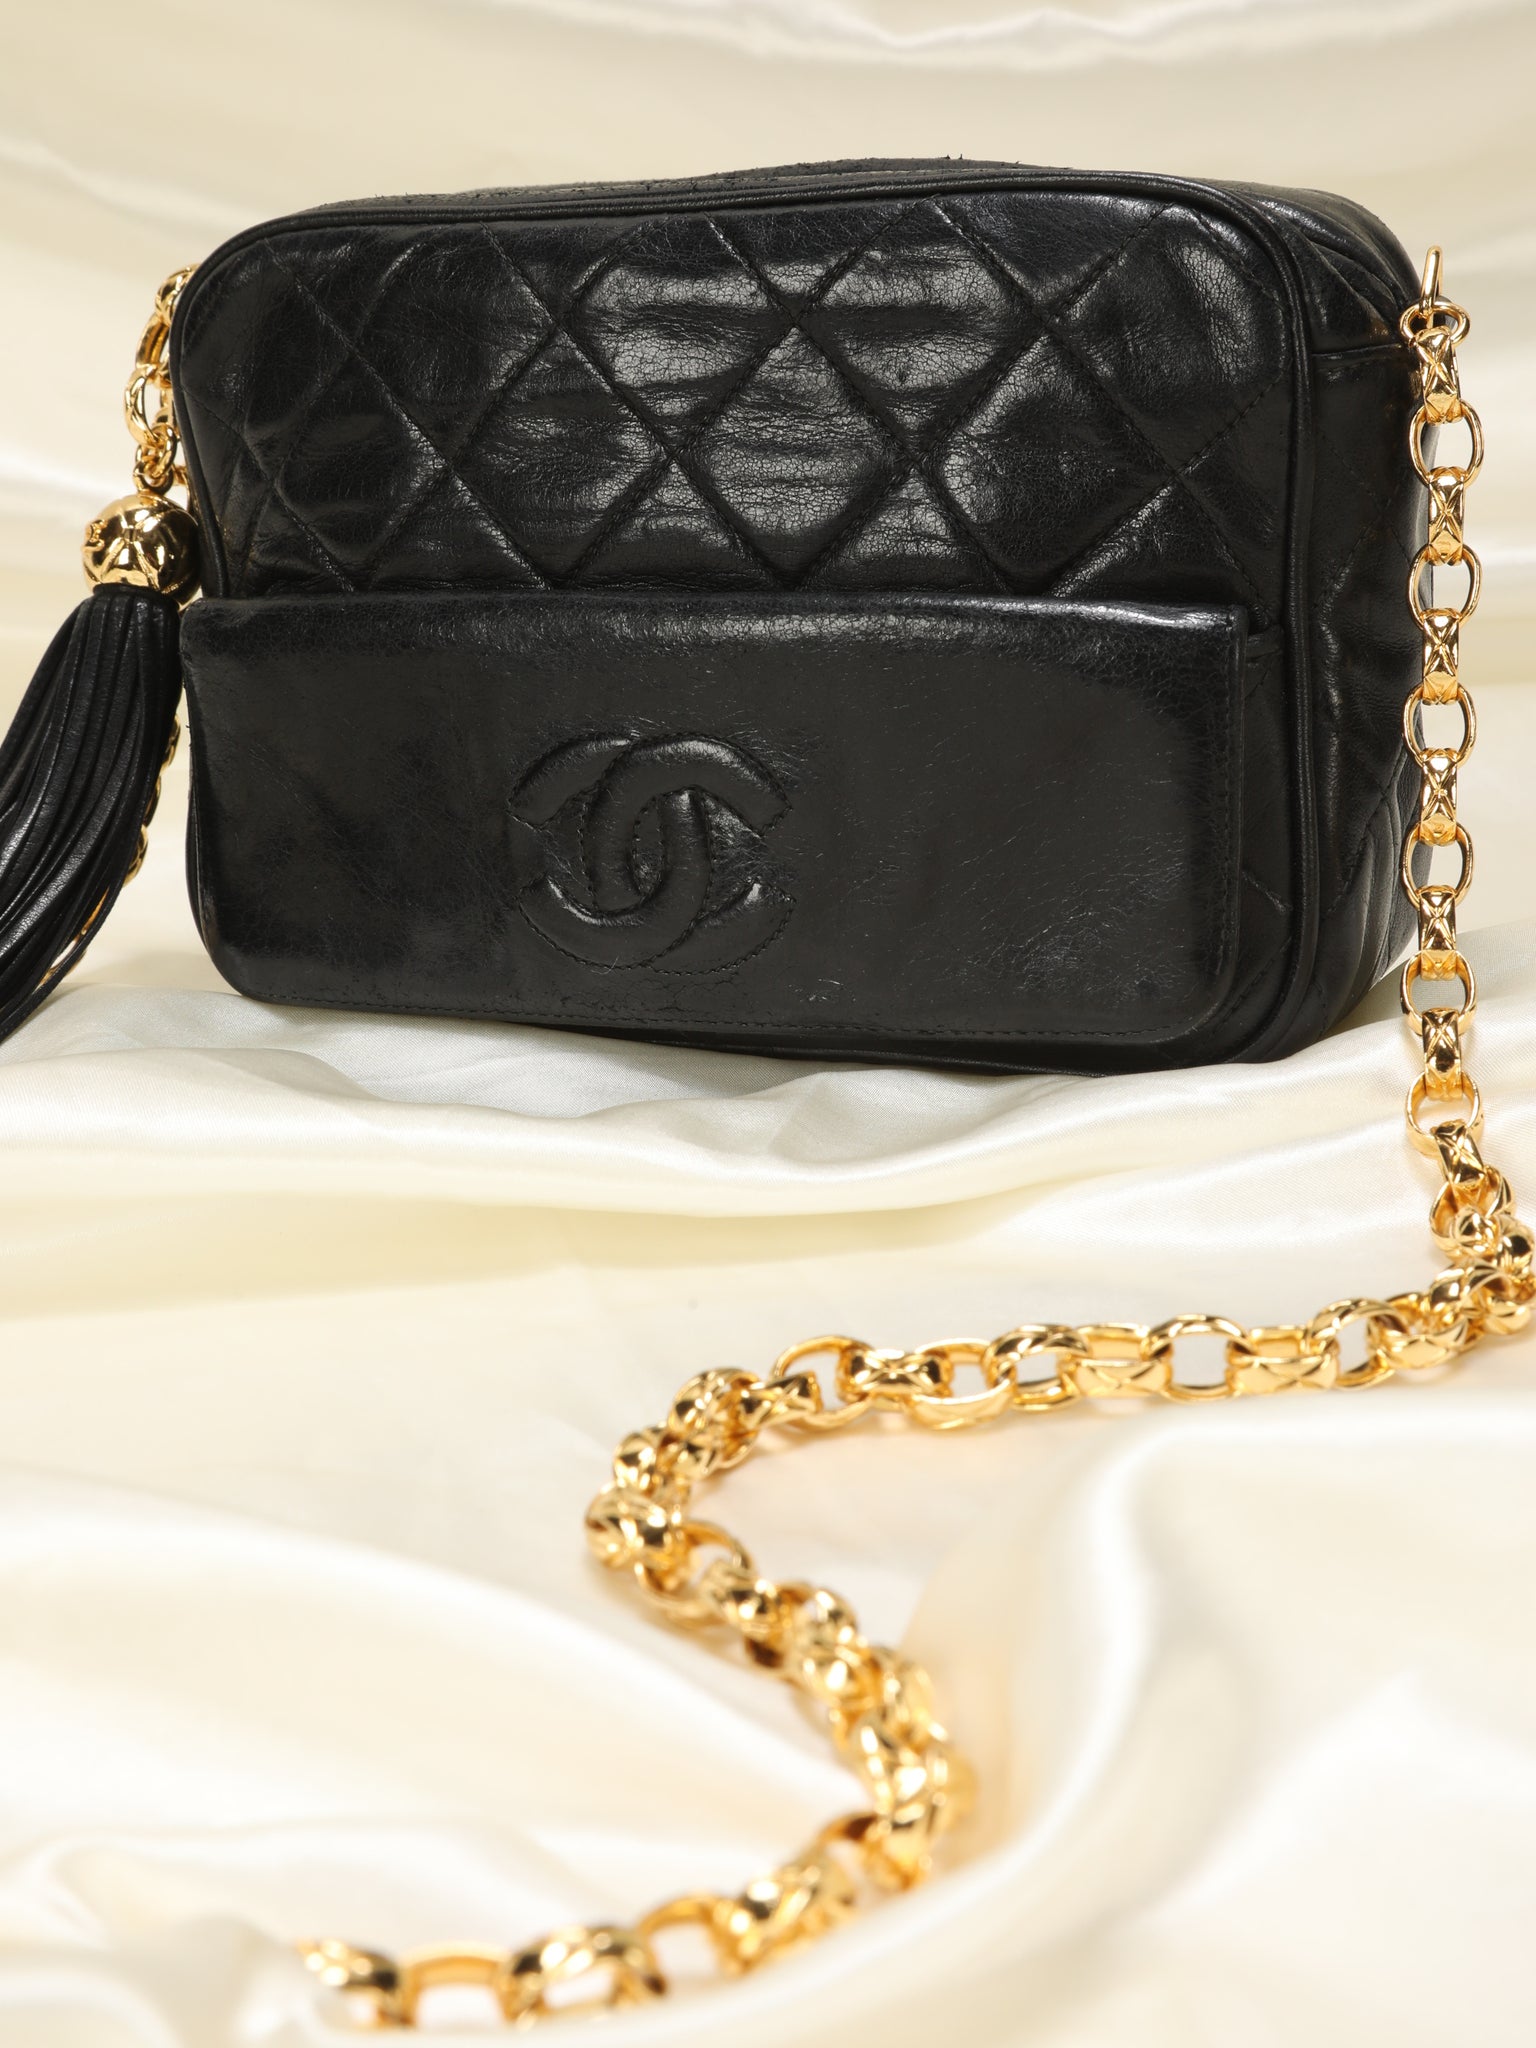 Chanel long rare patent leather classic Flap Bag With Bijoux Chain Bag